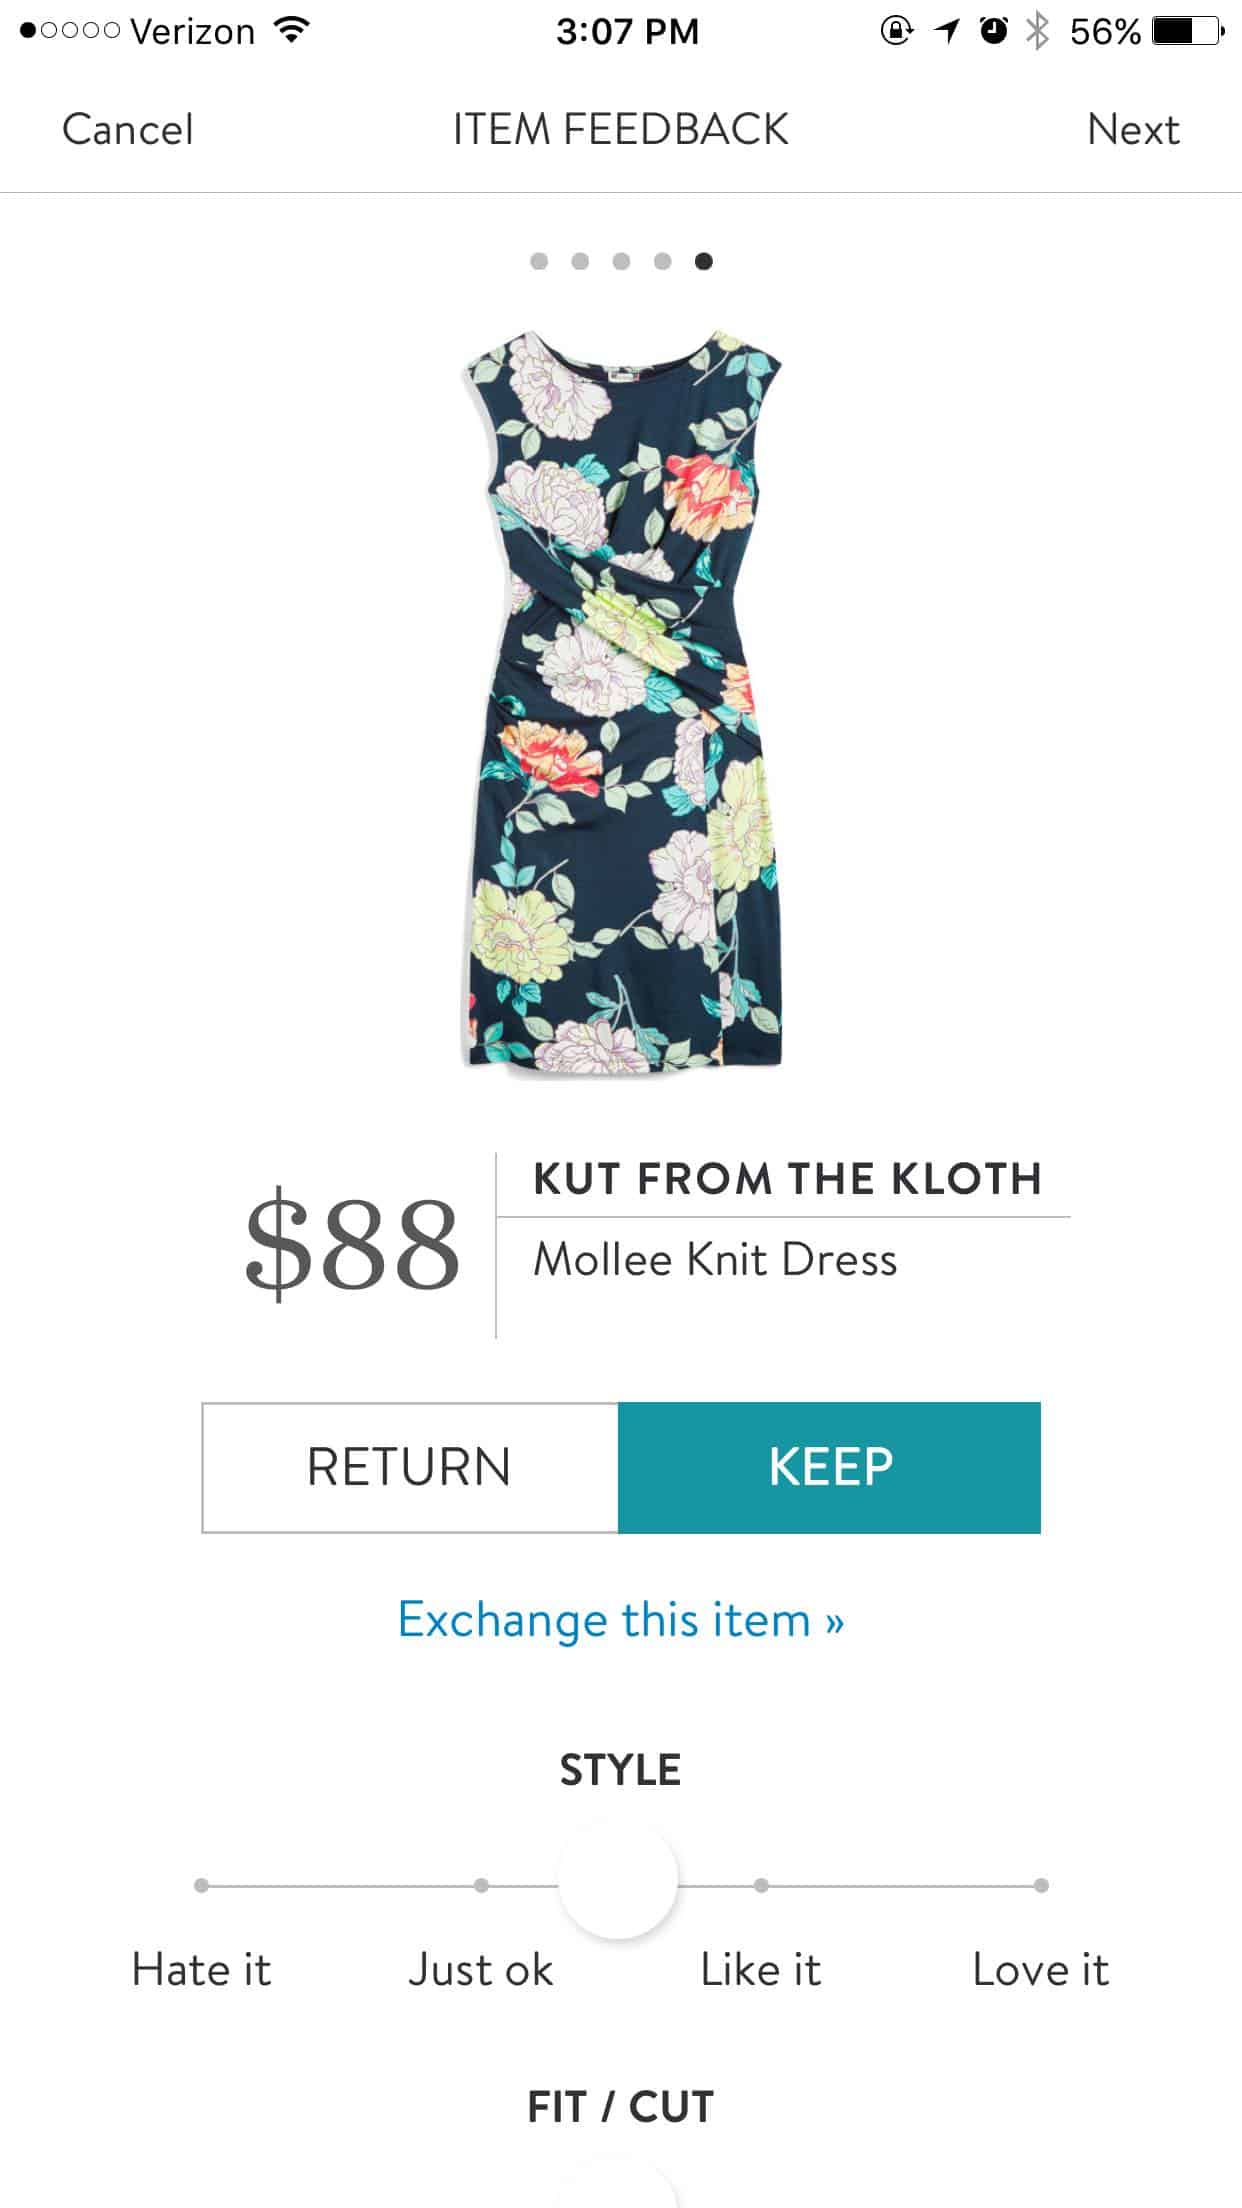 Stitch Fix #32 review - The Simple Life